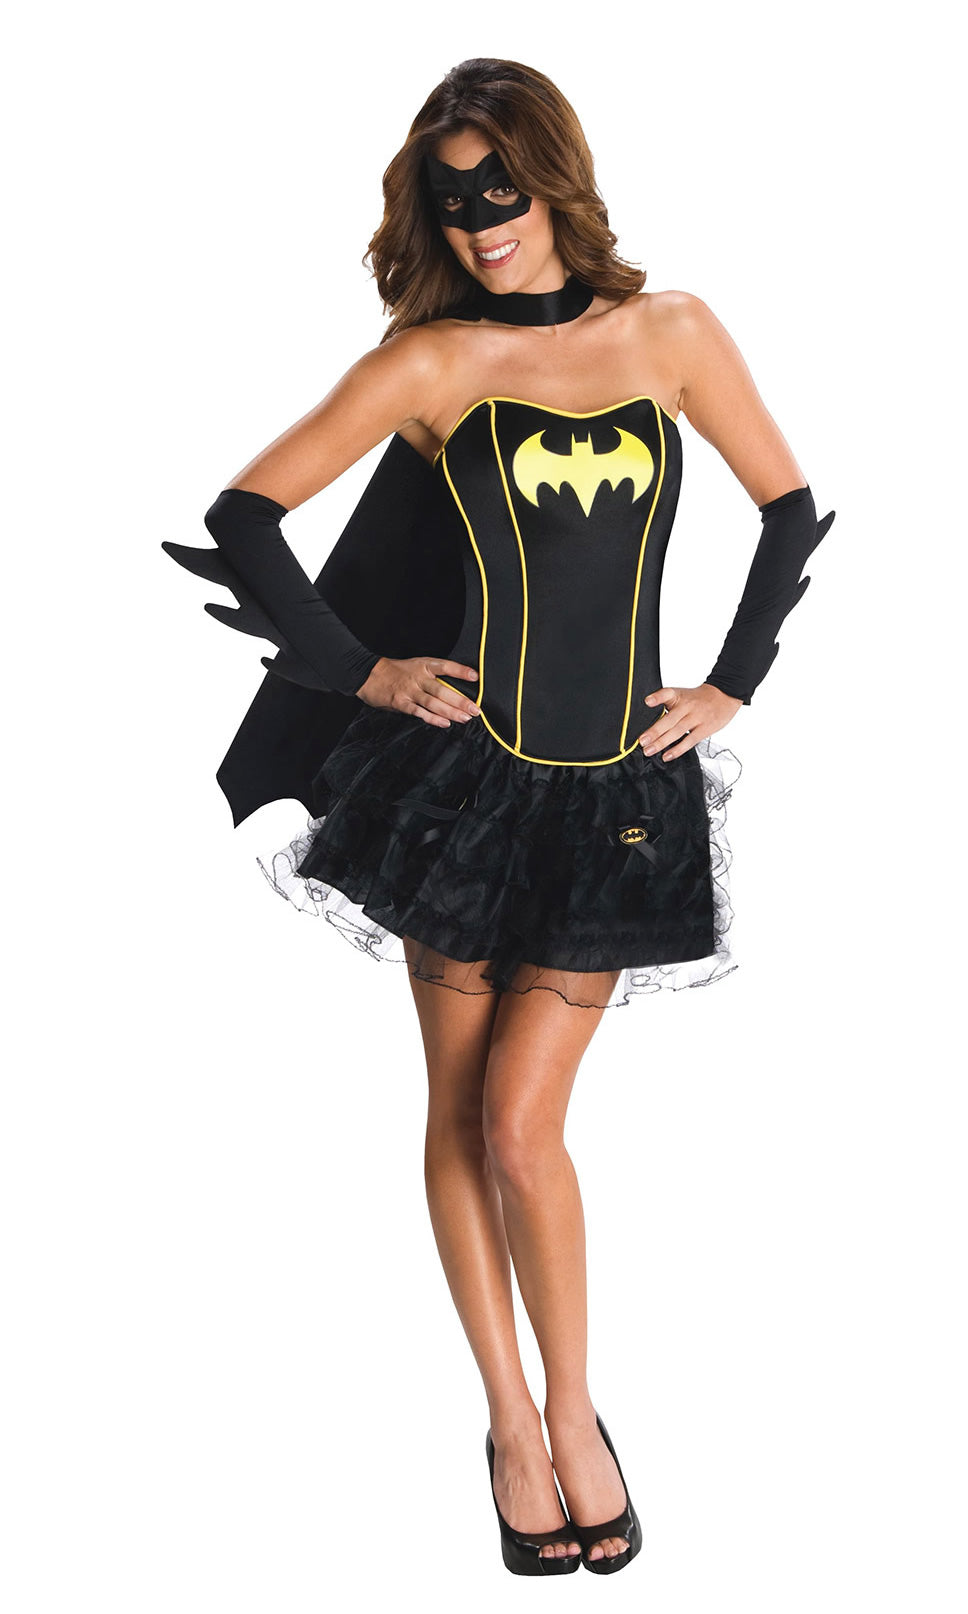 Woman's Batgirl costume with wrist cuffs, cape and mask